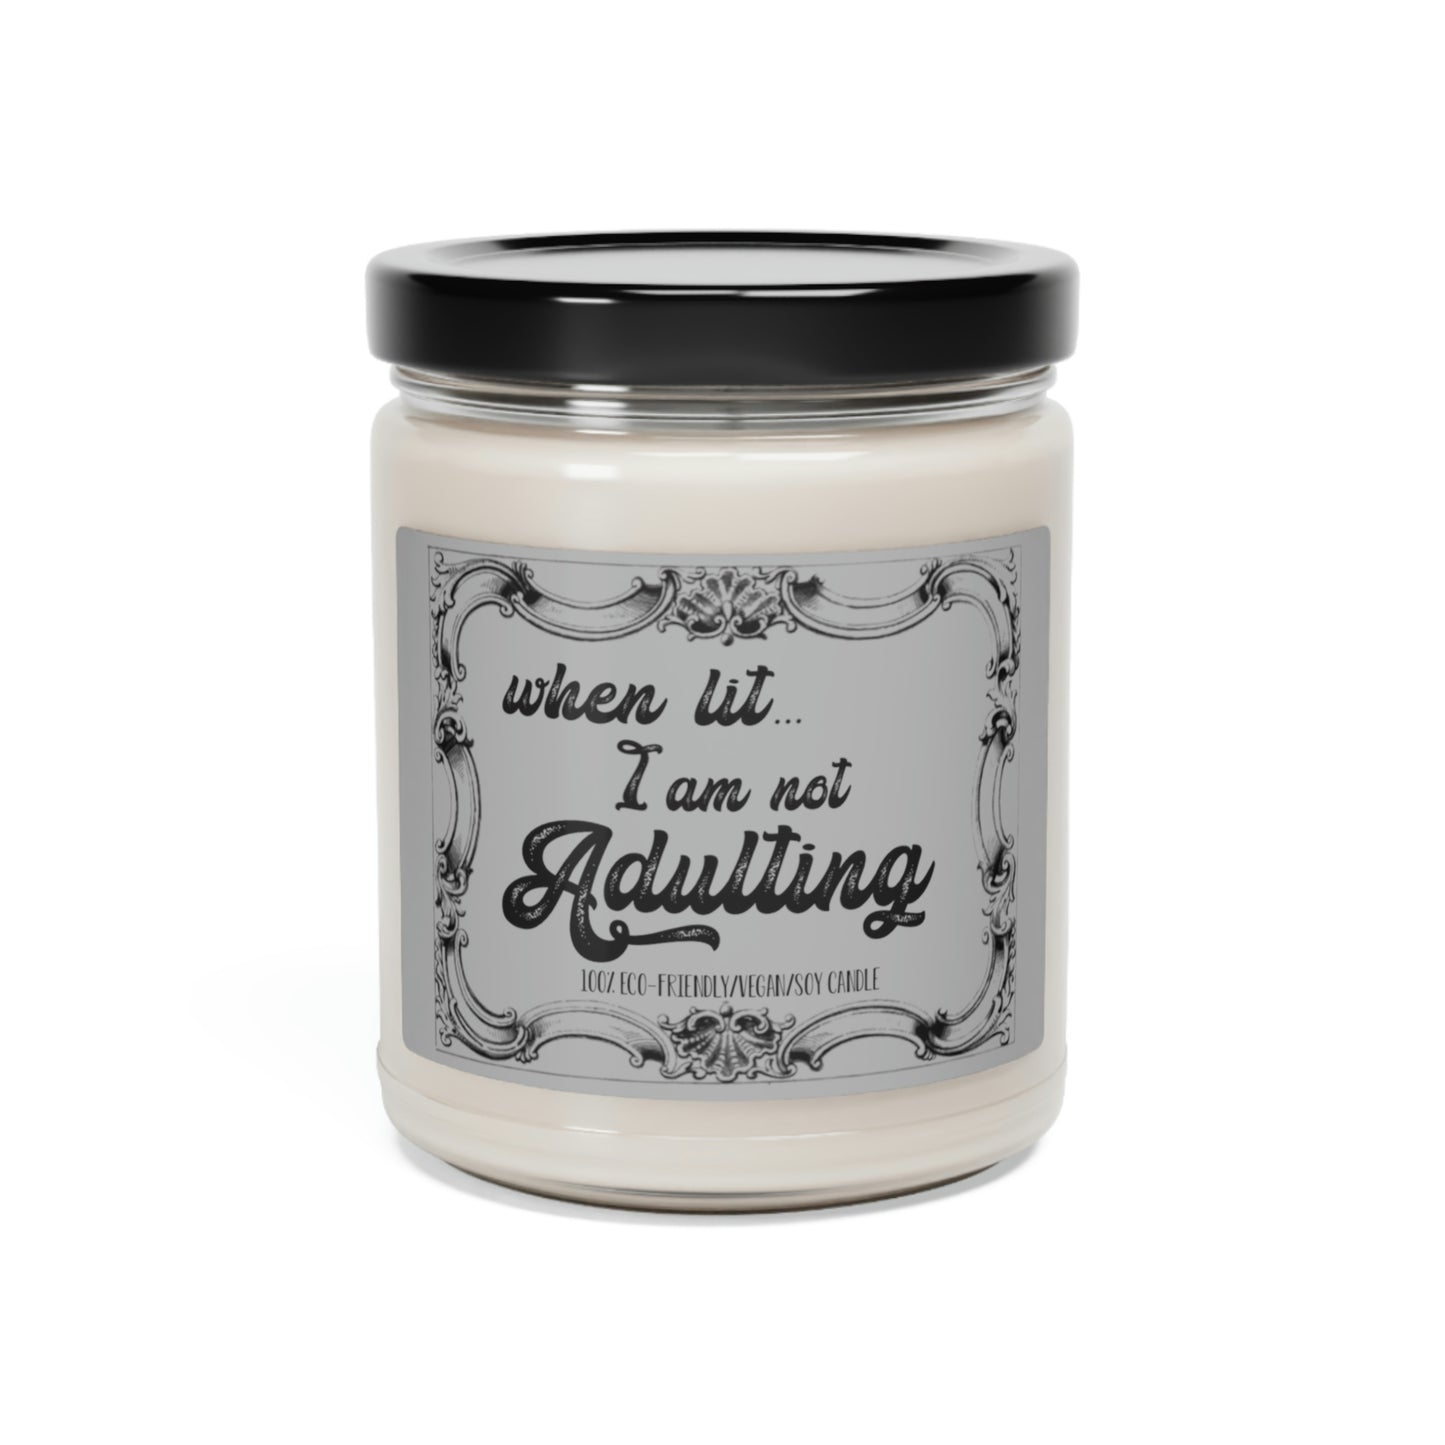 I am not Adulting Scented Soy Candle, 9oz